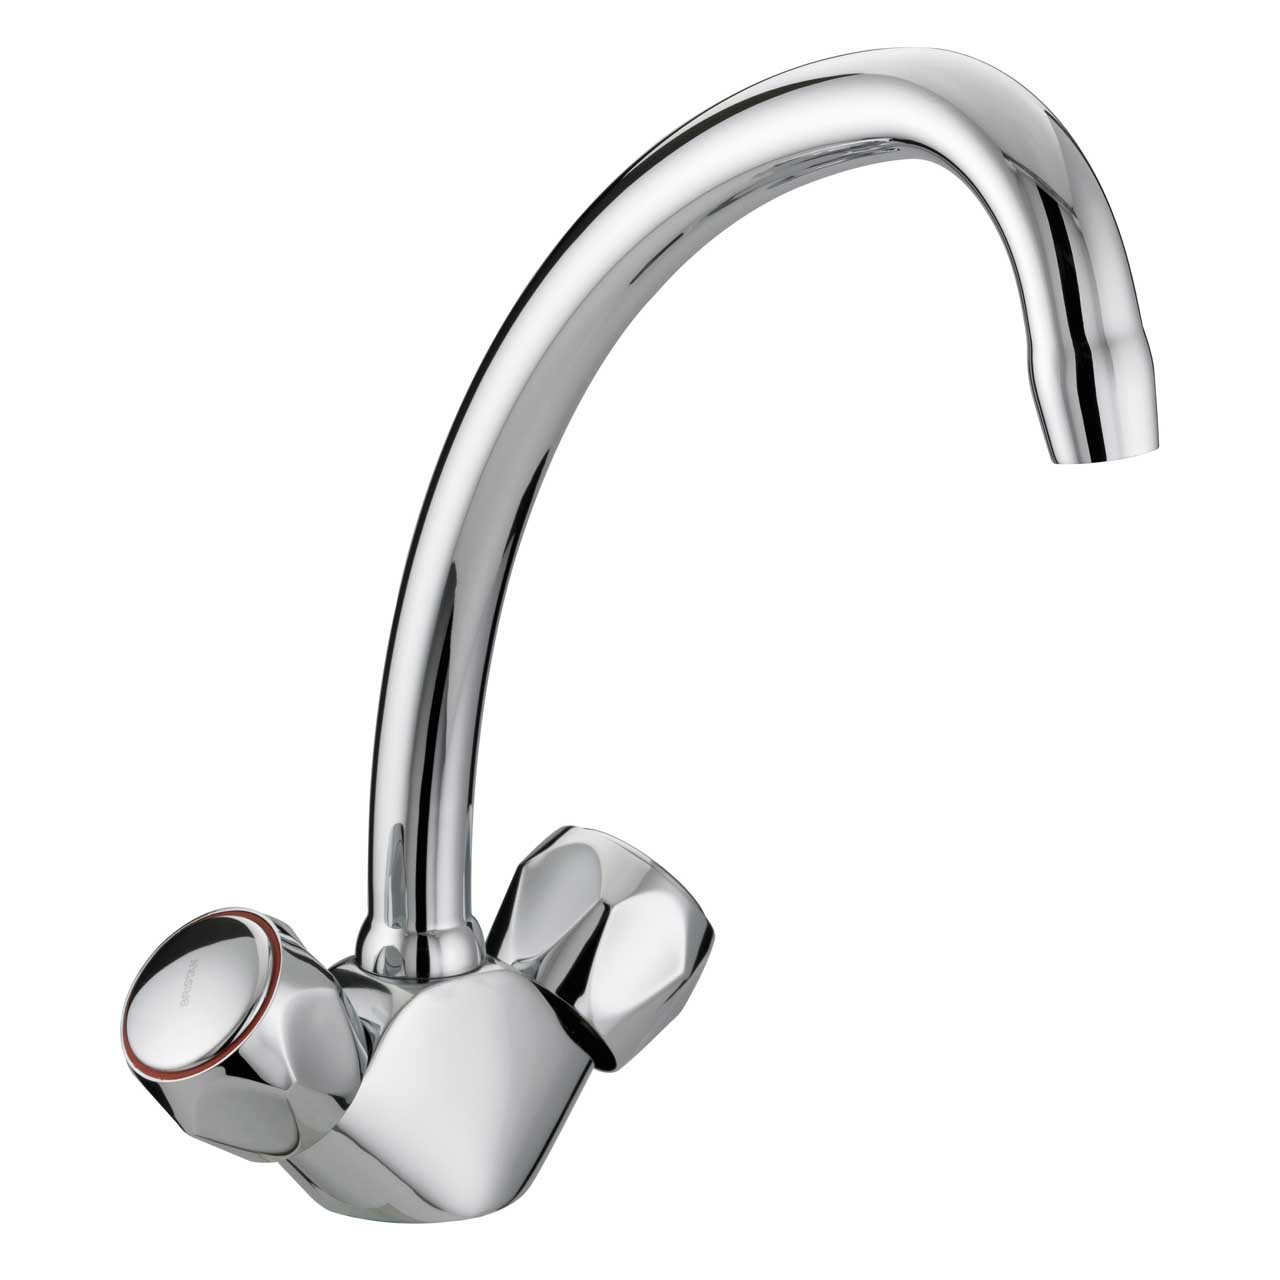 Photograph of Bristan Club Budget Monobloc Sink Mixer Chrome With Metal Heads